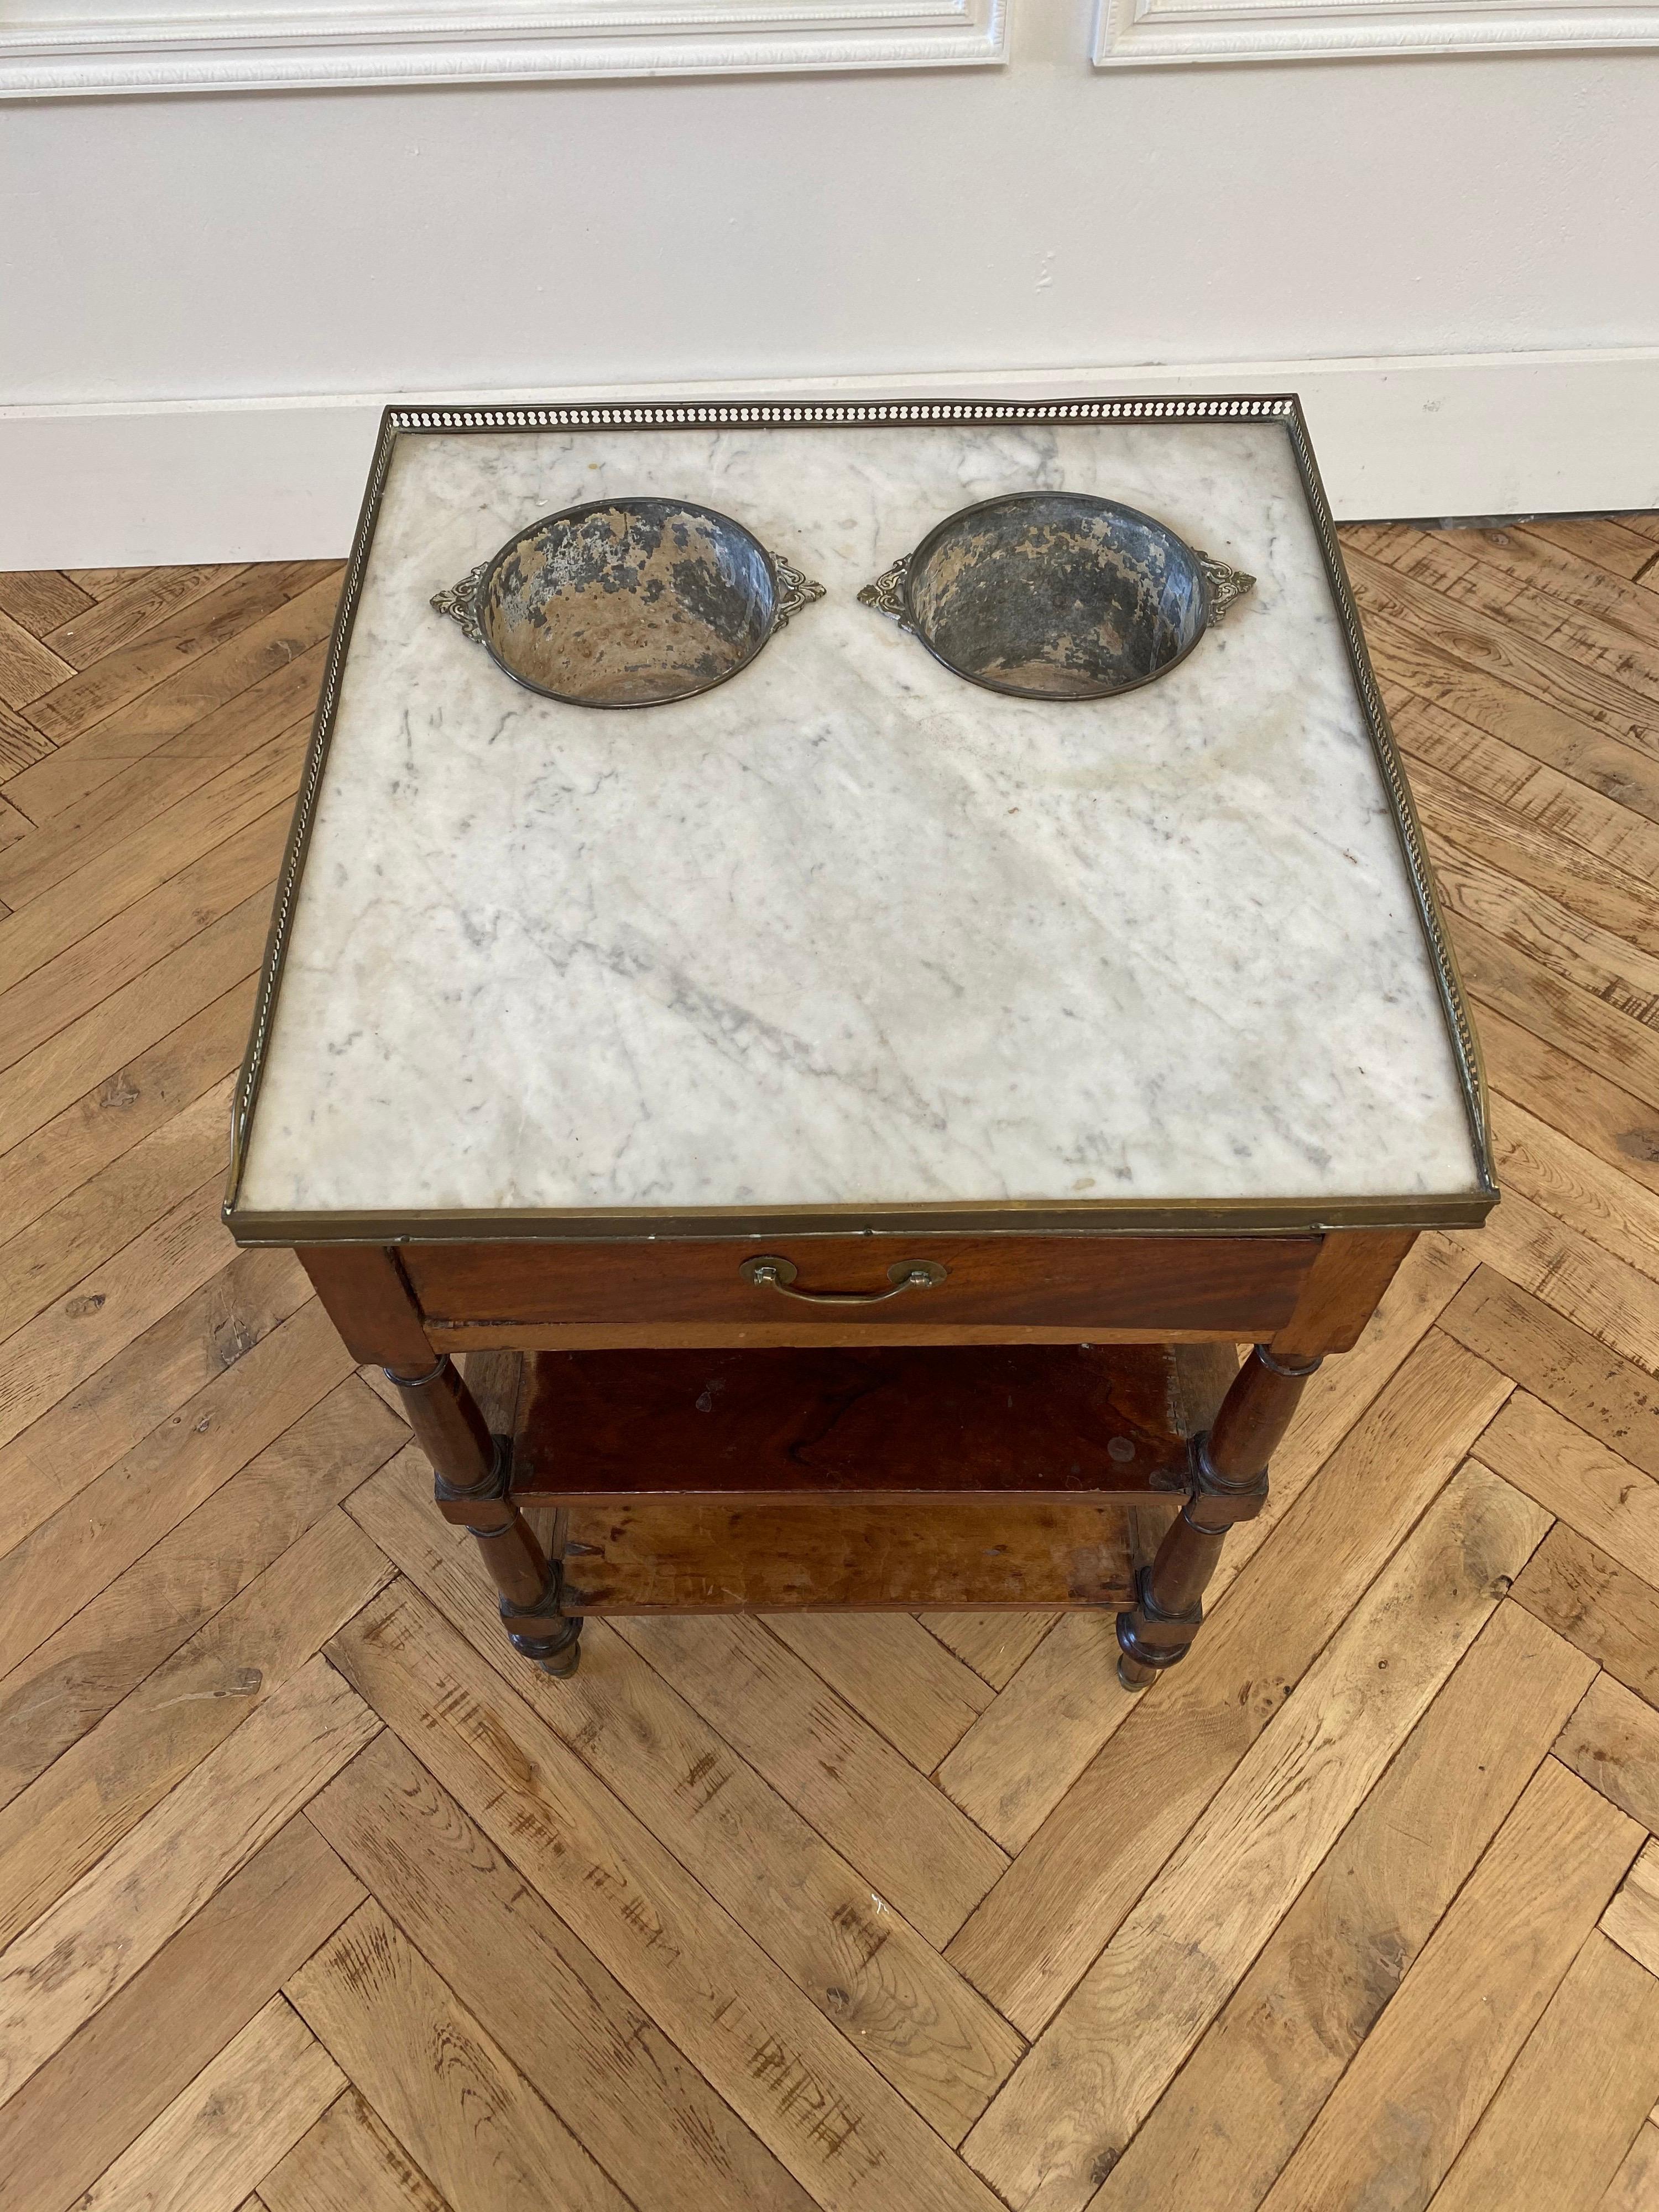 19th century English shaving table with marble top and metal tin buckets.
Great as a side table, or even to hold greenery.
Solid and sturdy, has 1 drawer, with shelves.
  